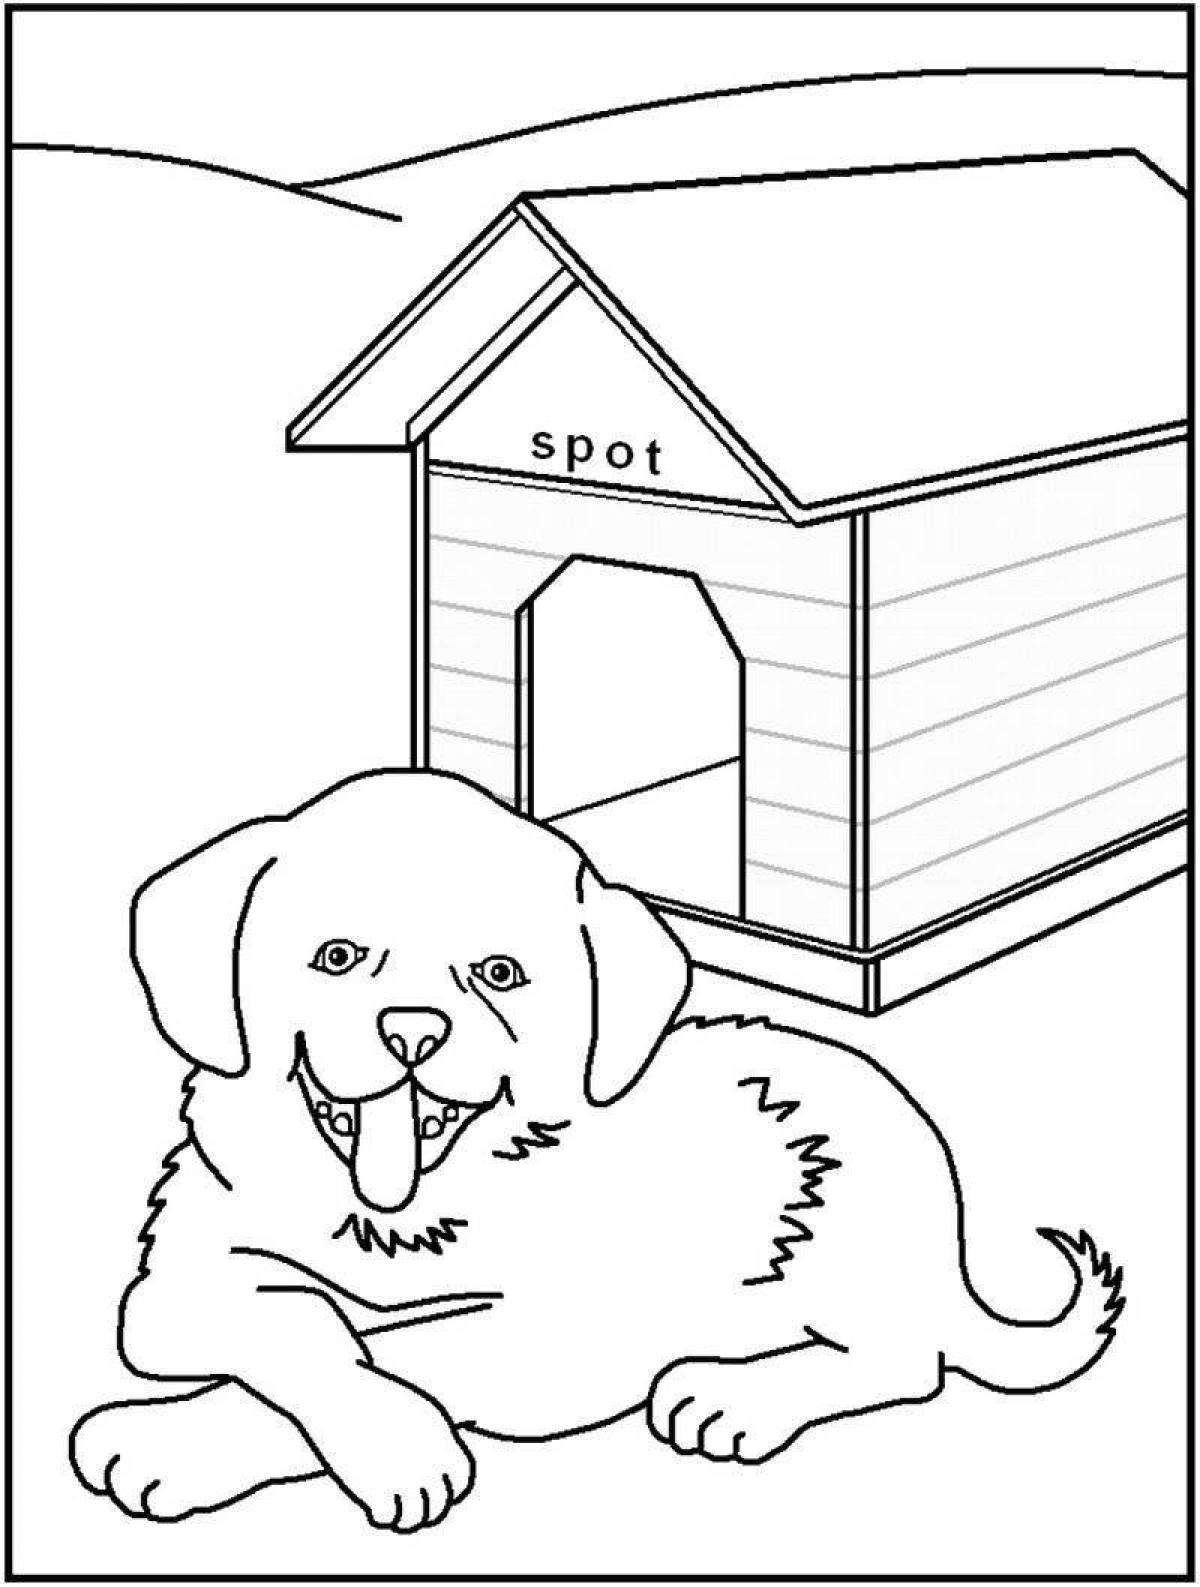 Relaxing dog house coloring page